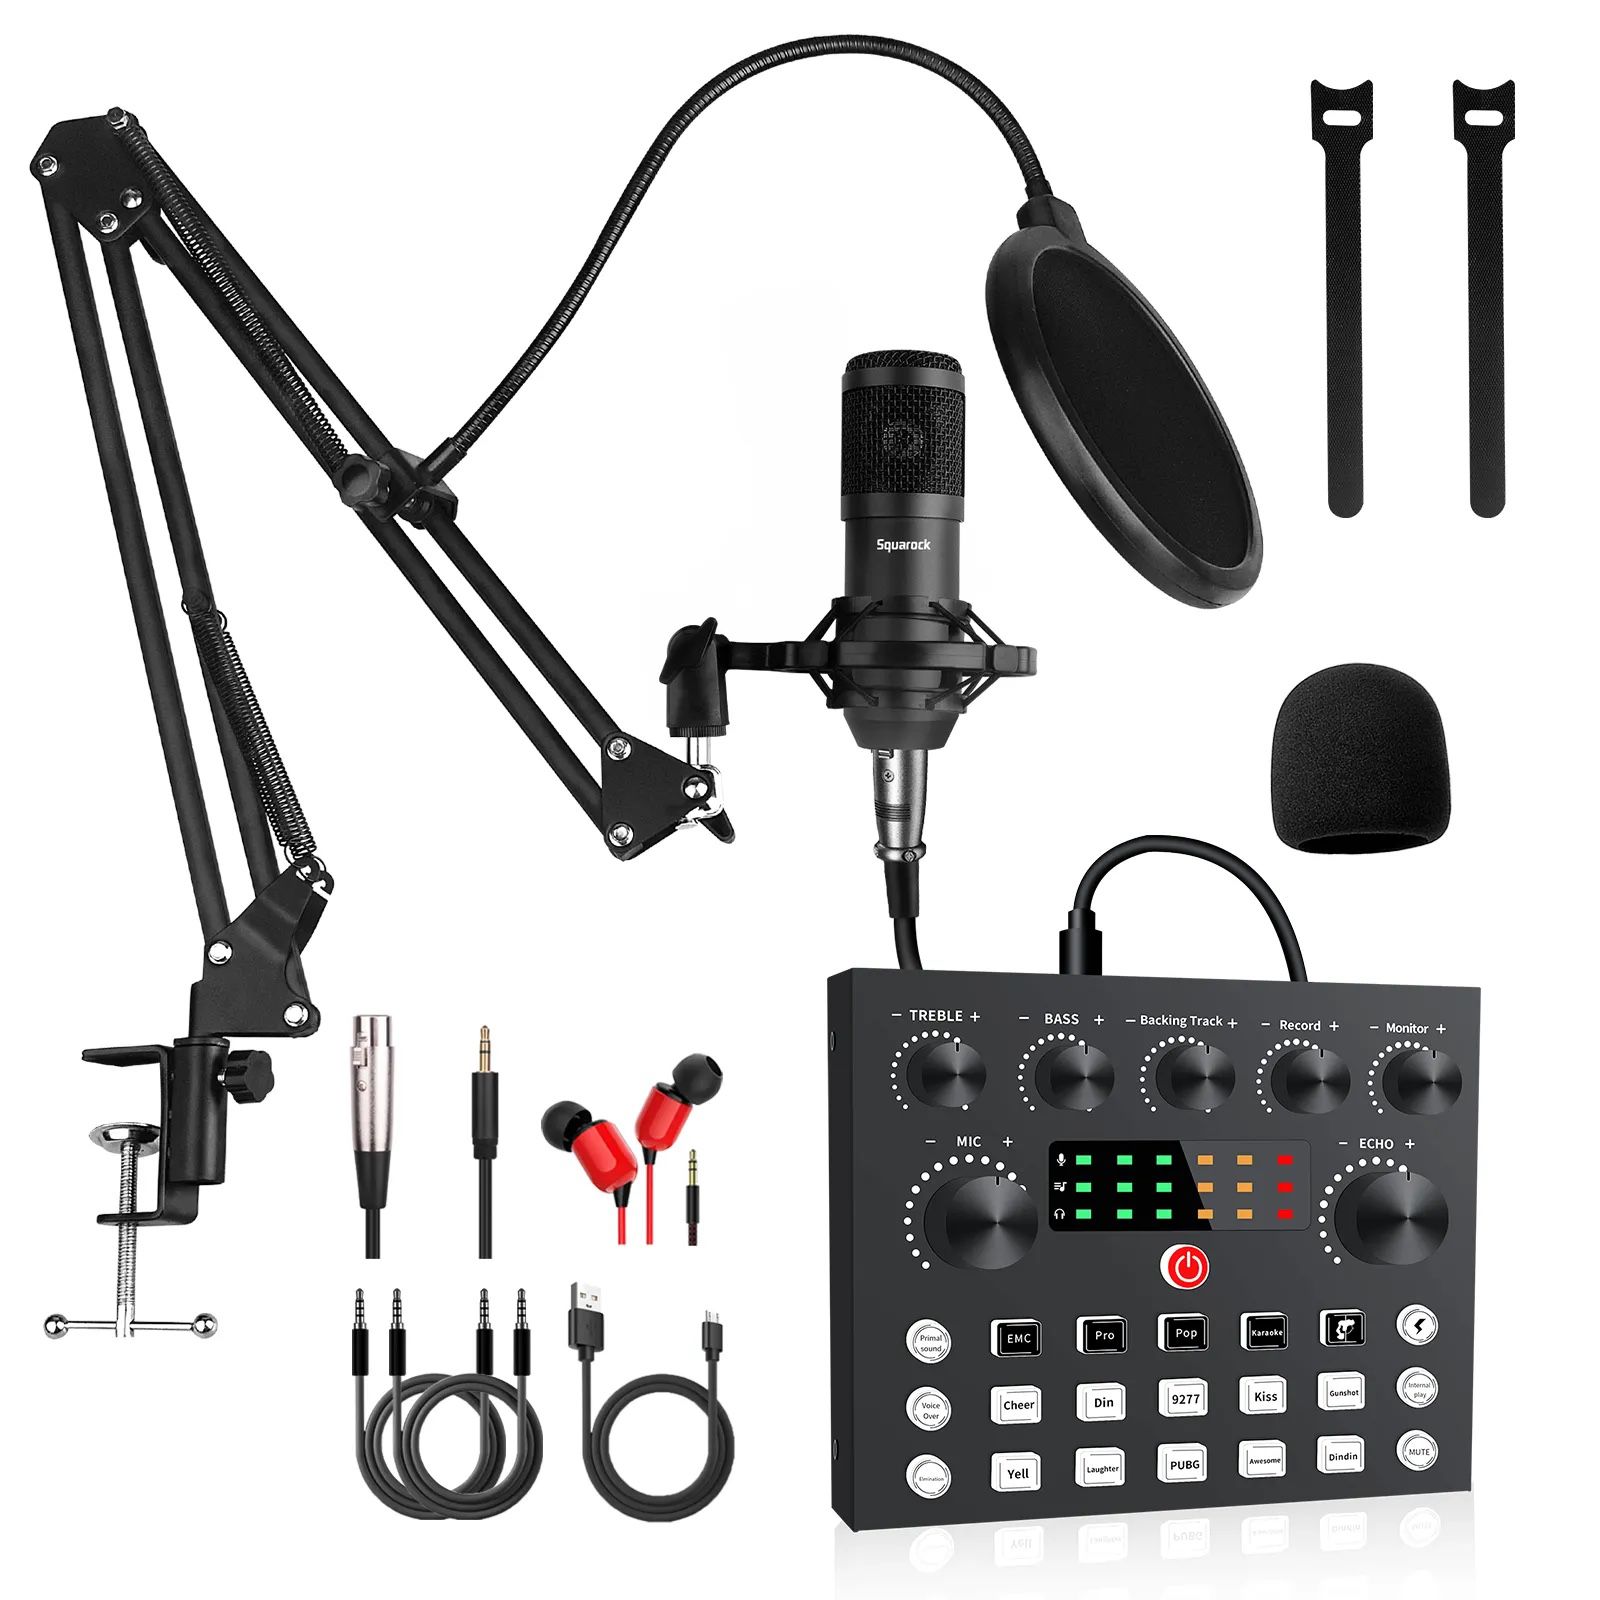 Podcast Equipment Bundle,Audio Interface with All-In-One DJ Mixer and Studio Broadcast Microphone, Perfect for Recording,Live Streaming,Gaming,Compati